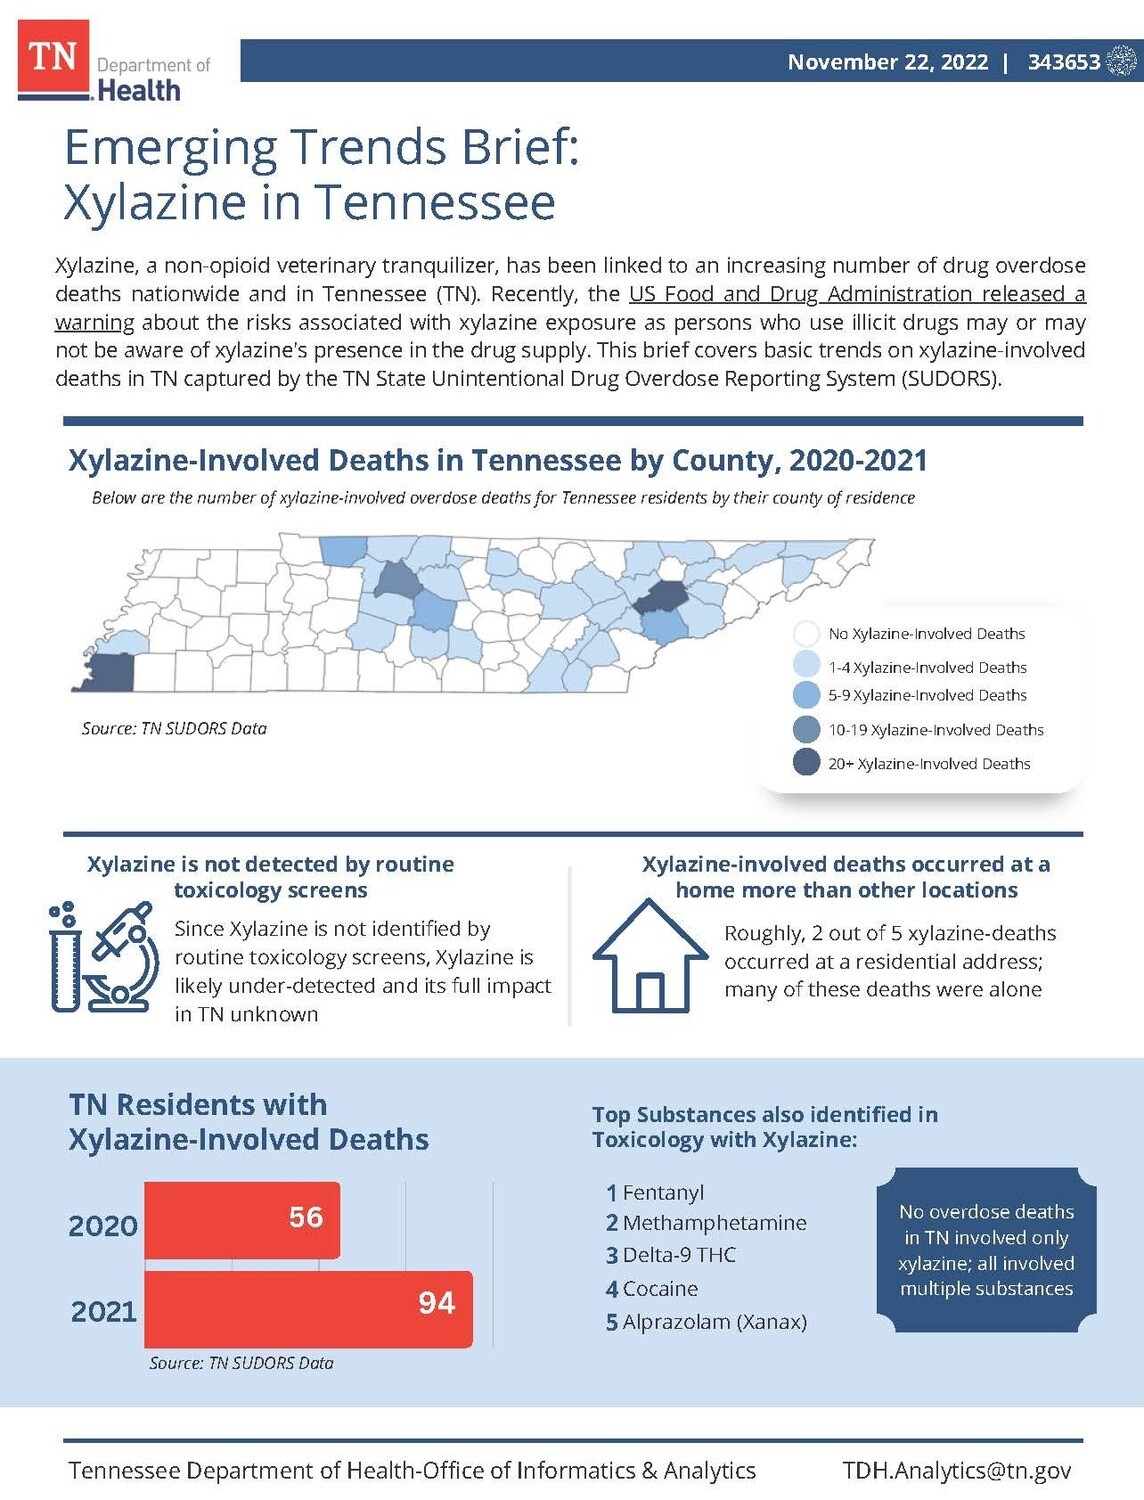 Emerging Trends Brief: Xylazine in Tennessee